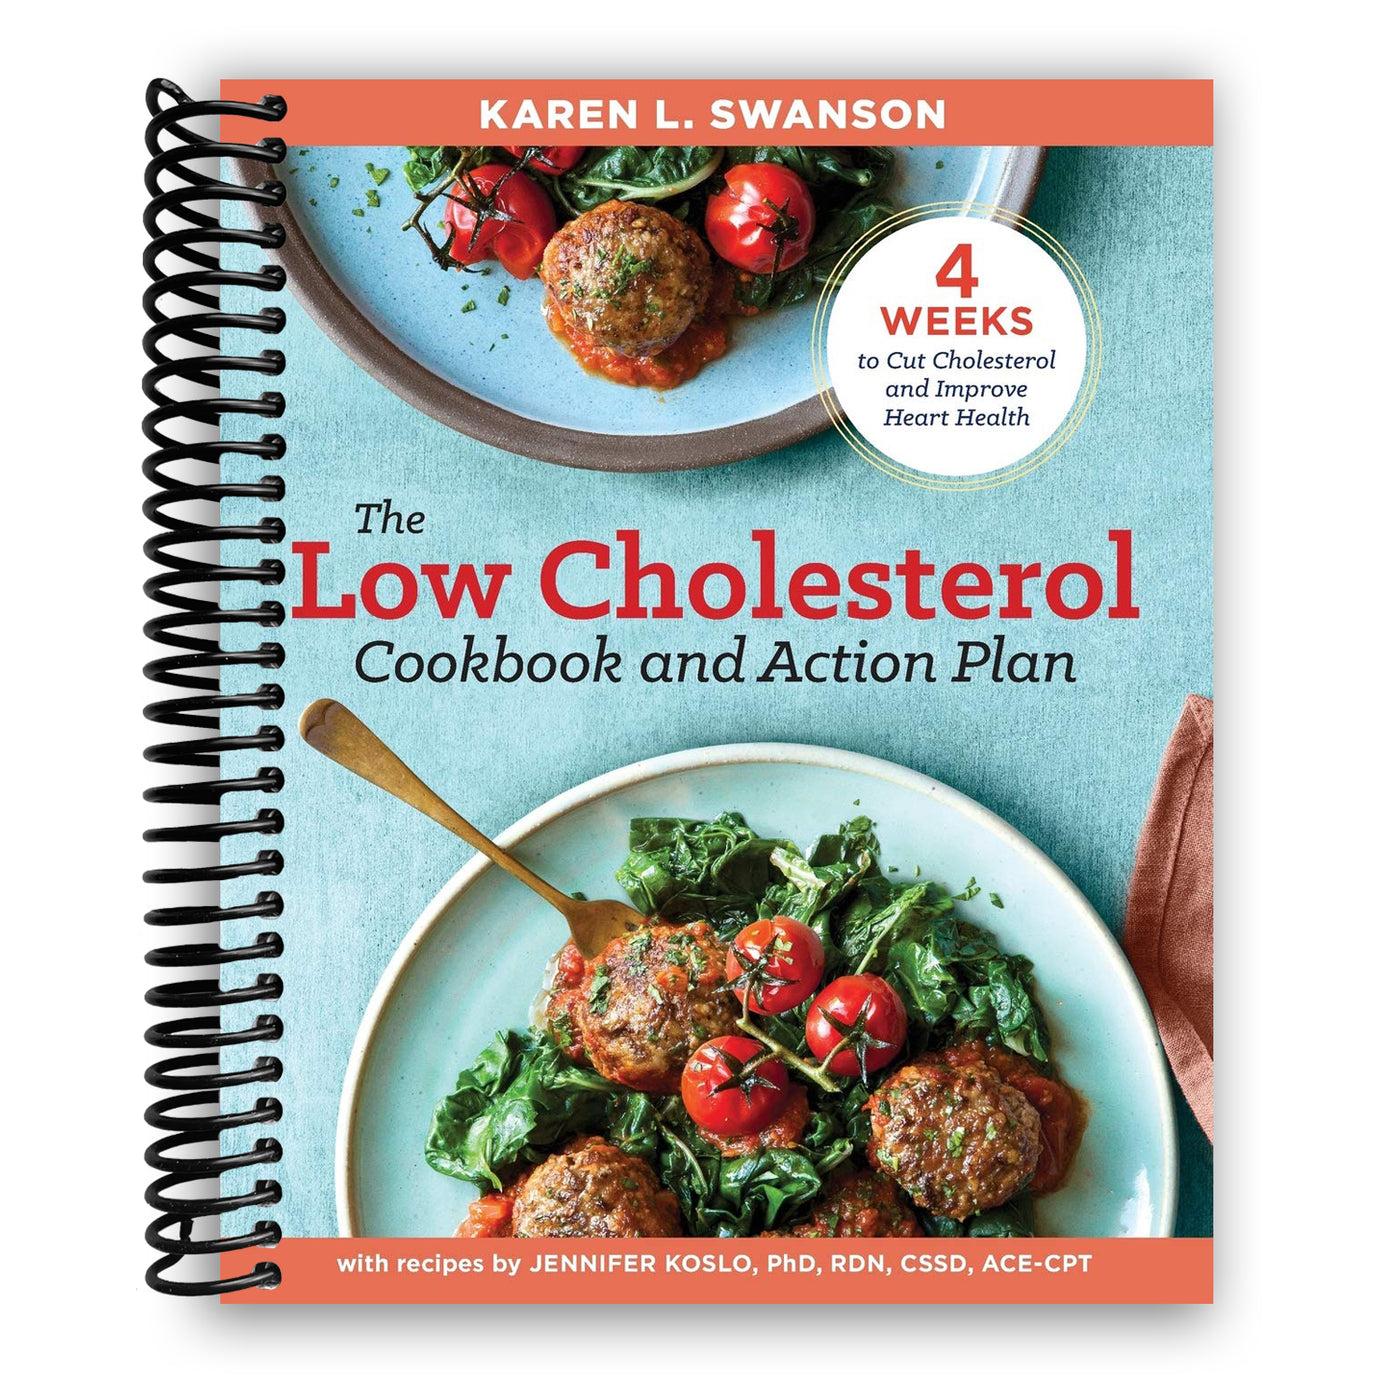 The Low Cholesterol Cookbook and Action Plan: 4 Weeks to Cut Cholesterol and Improve Heart Health (Spiral Bound)